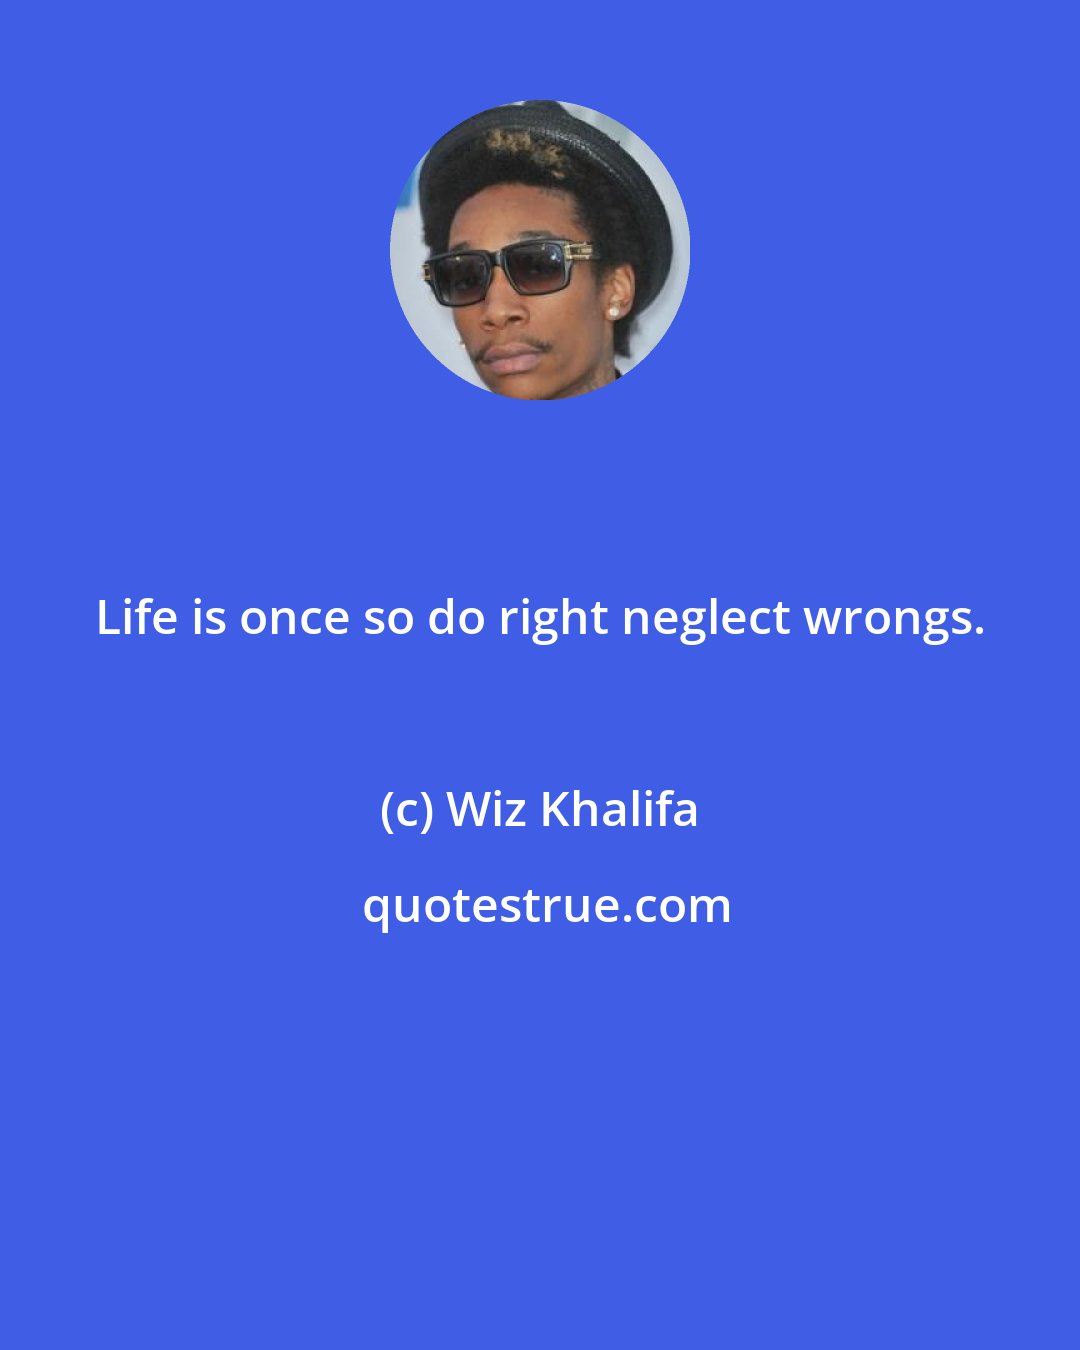 Wiz Khalifa: Life is once so do right neglect wrongs.